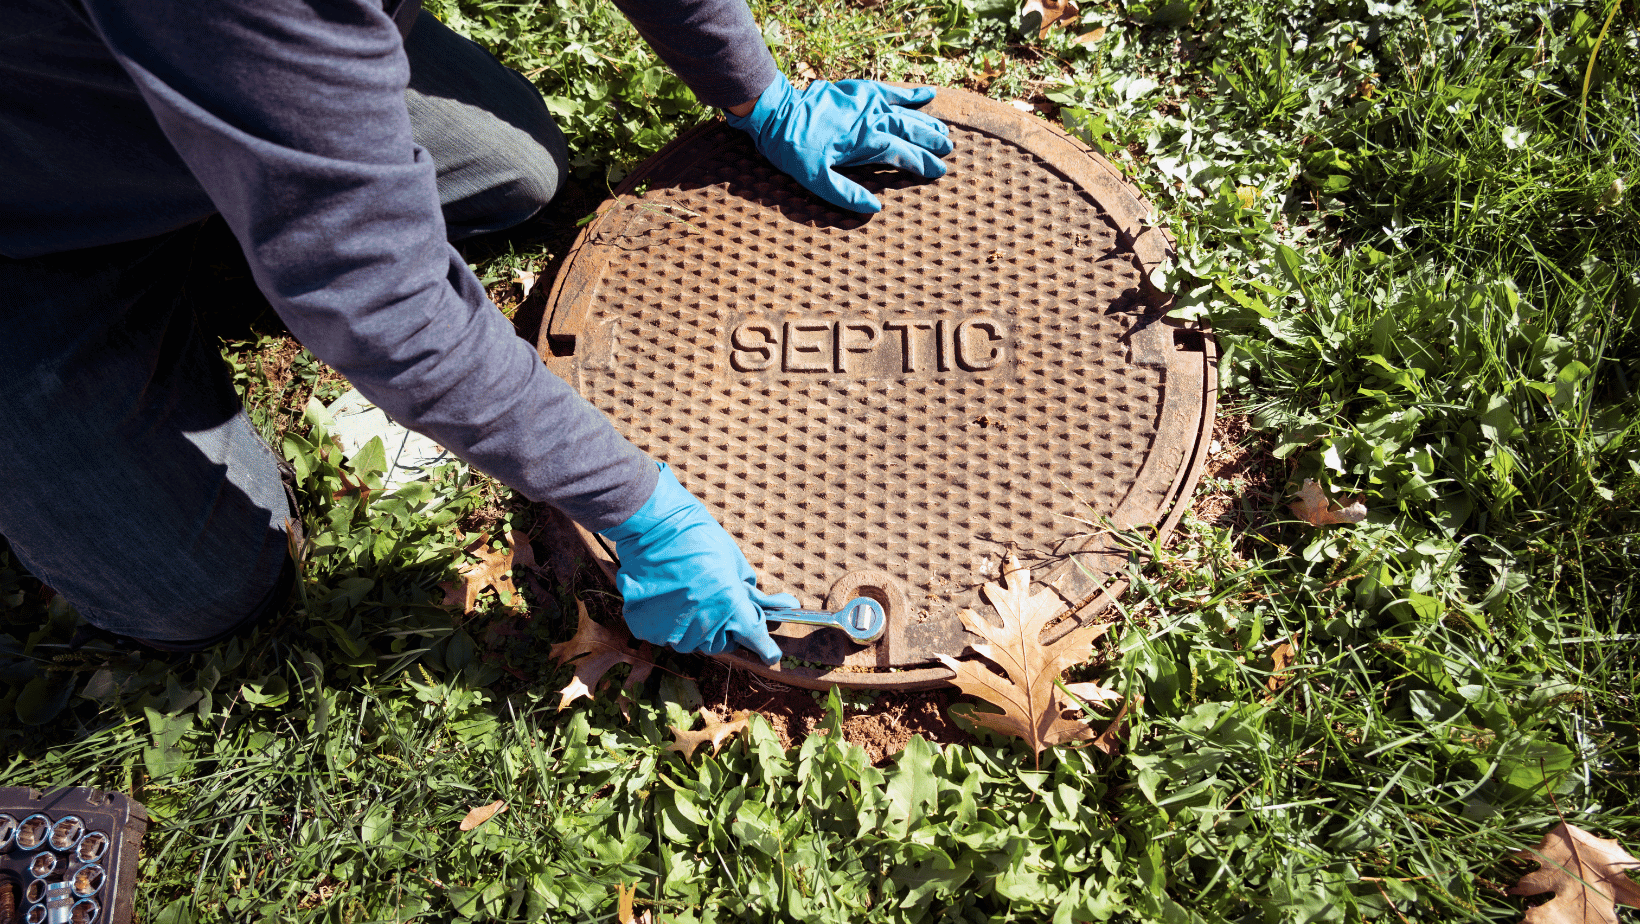 A septic inspector opening septic system tank.